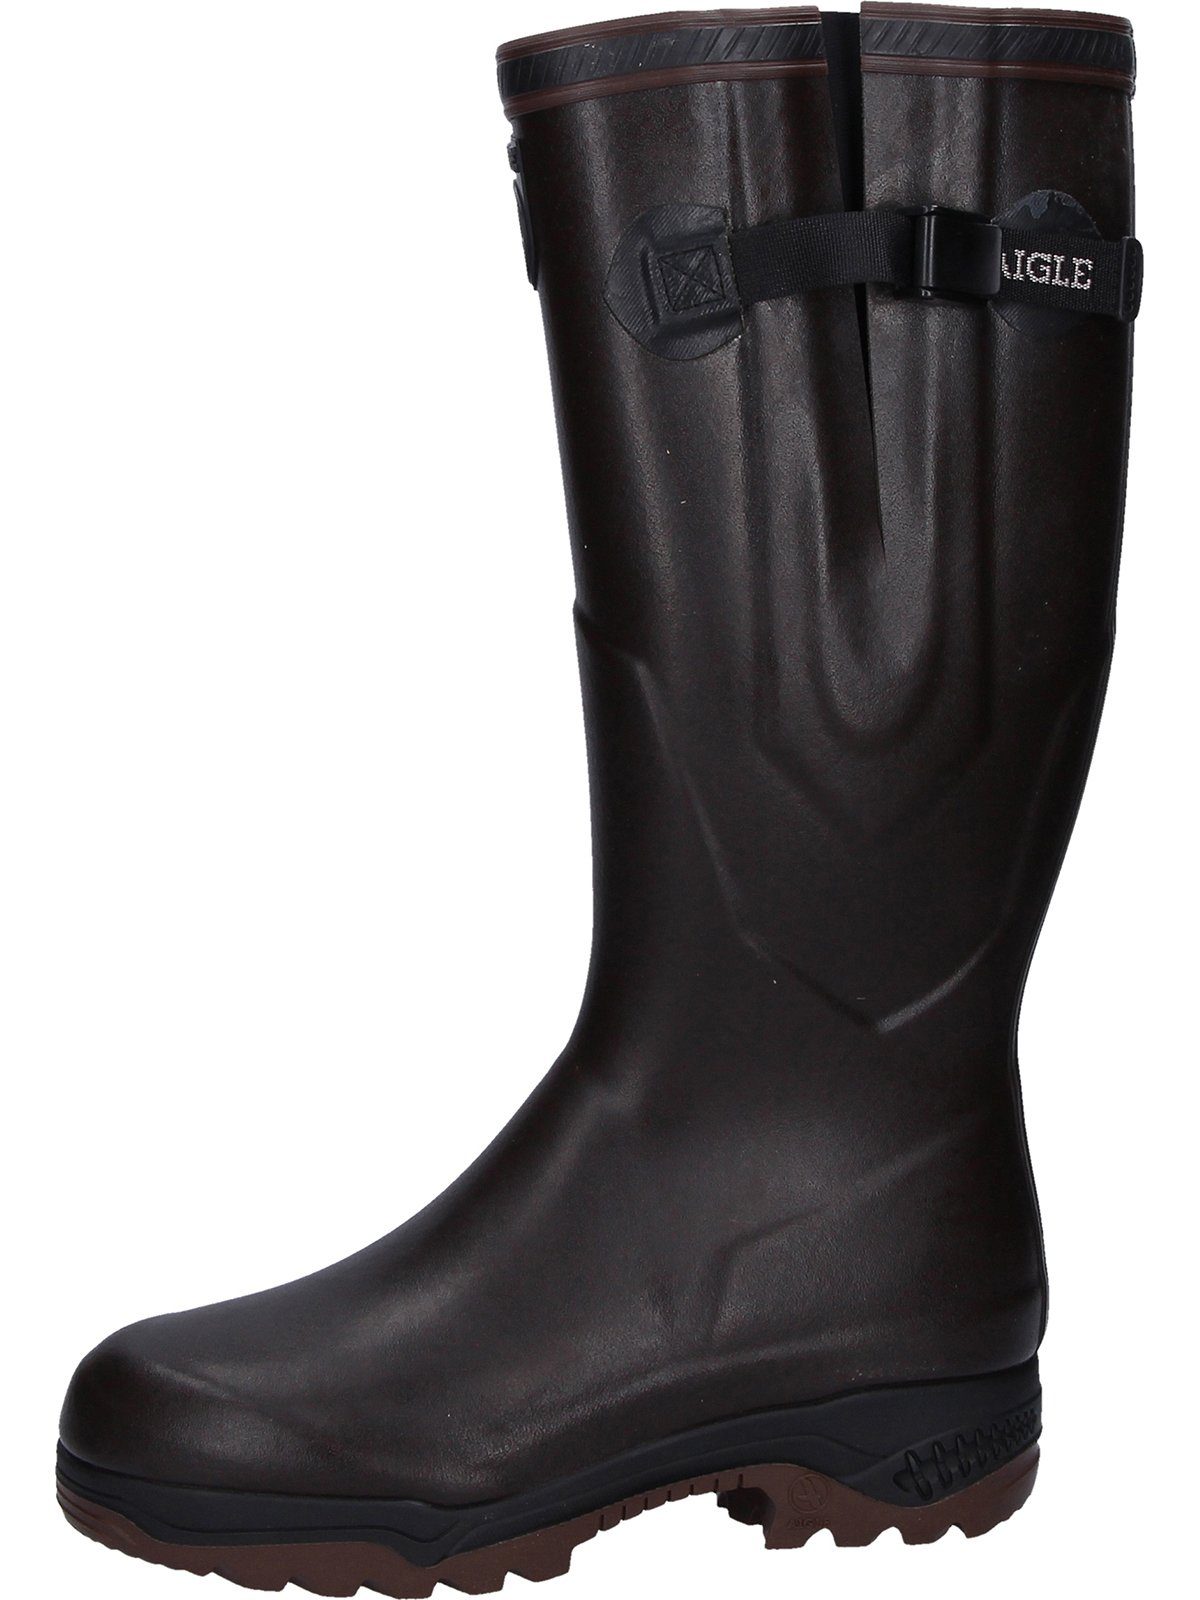 Stiefel Brun 2 Iso Aigle (Braun) Parcours®